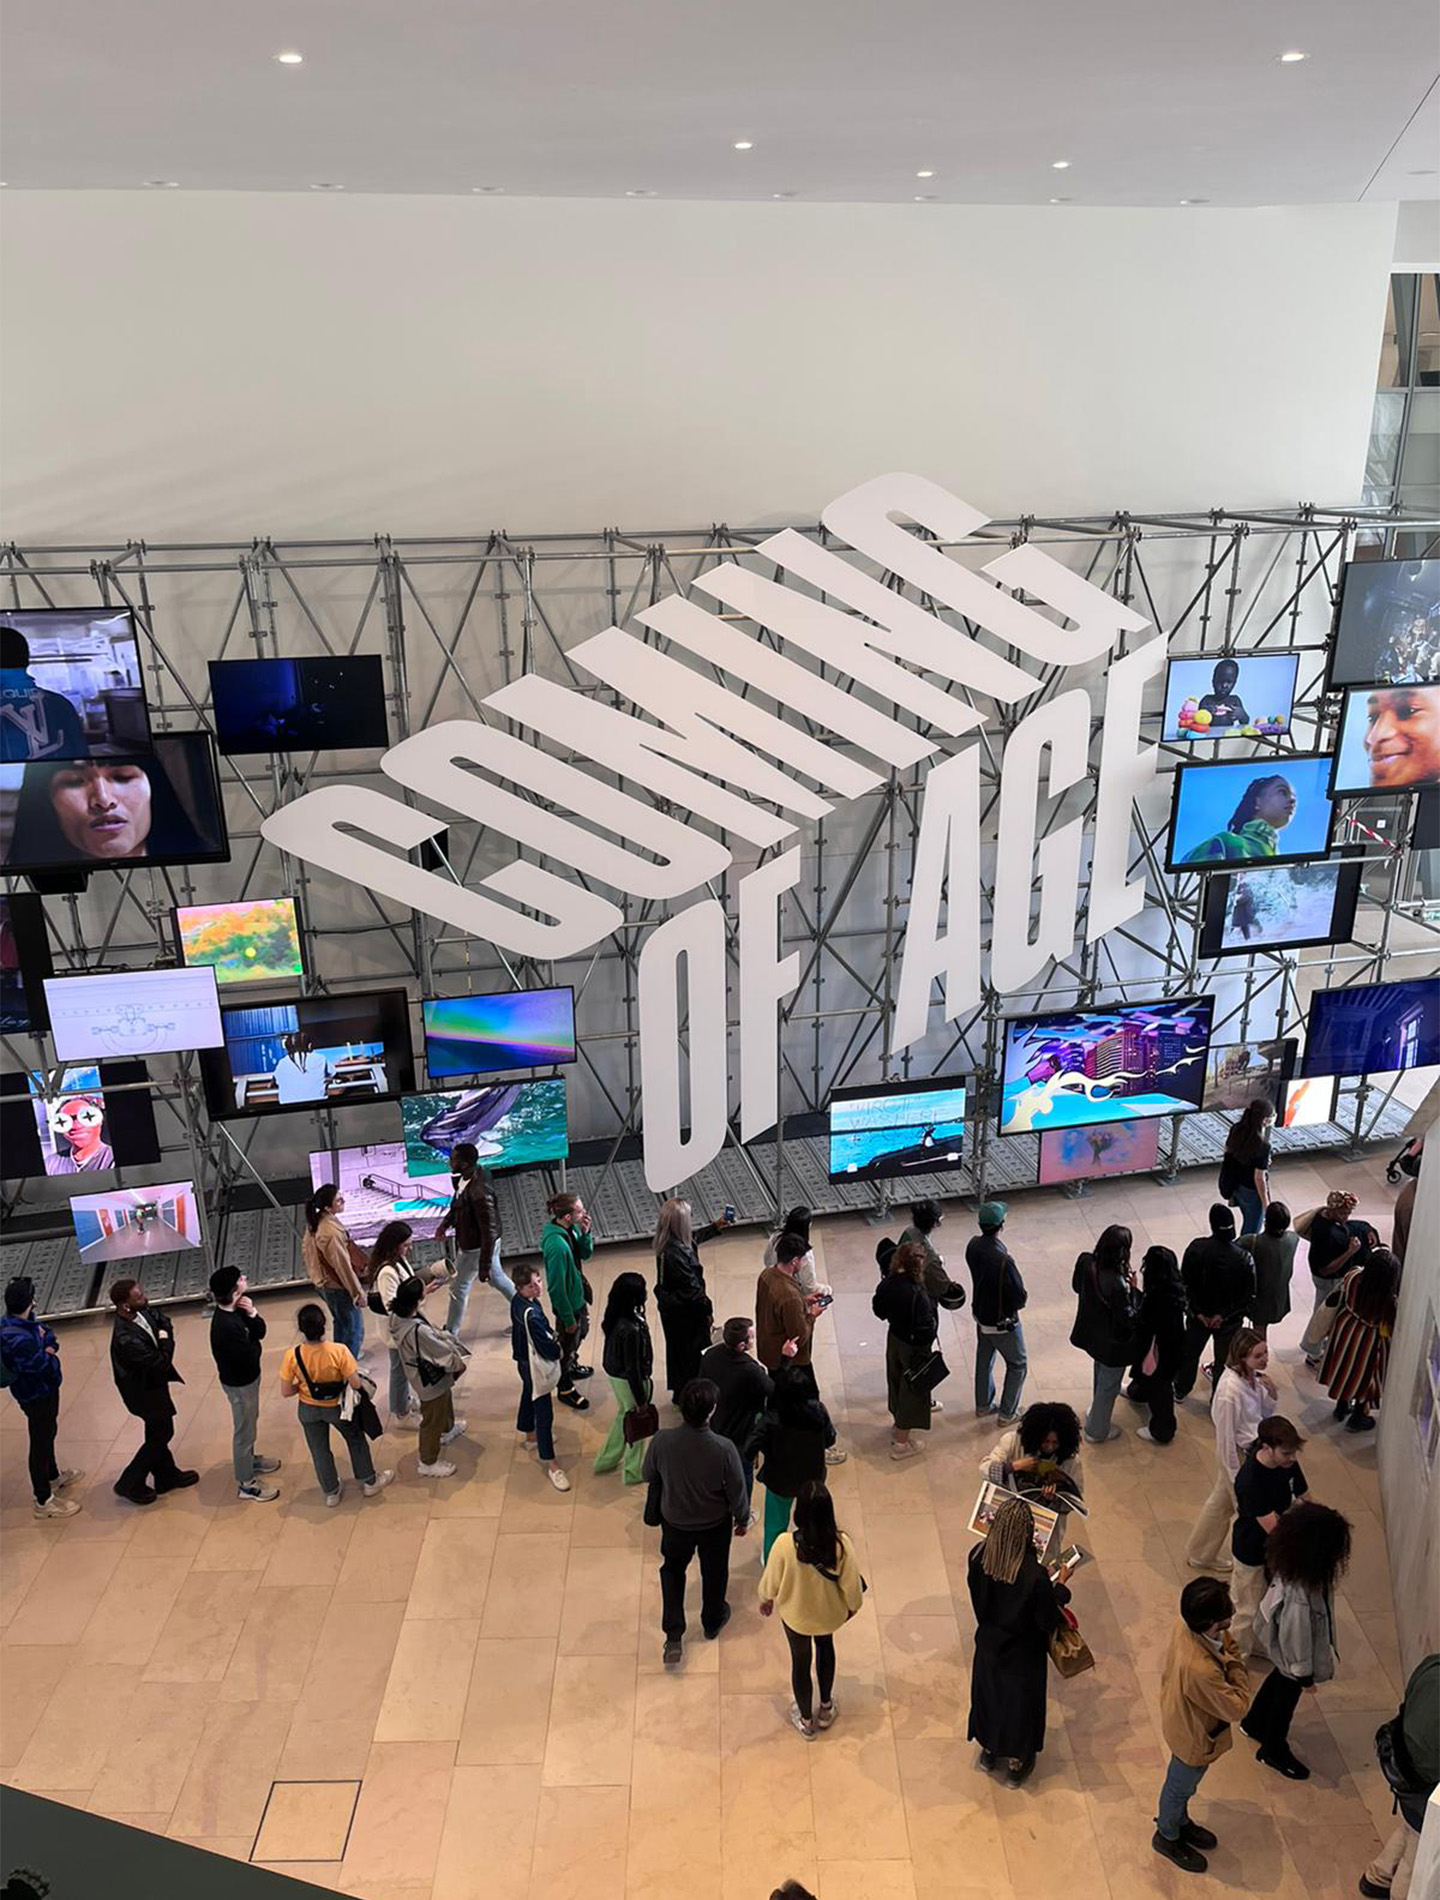 “Coming of age”, the exhibition in memory of Virgil Abloh at the Louis Vuitton Foundation